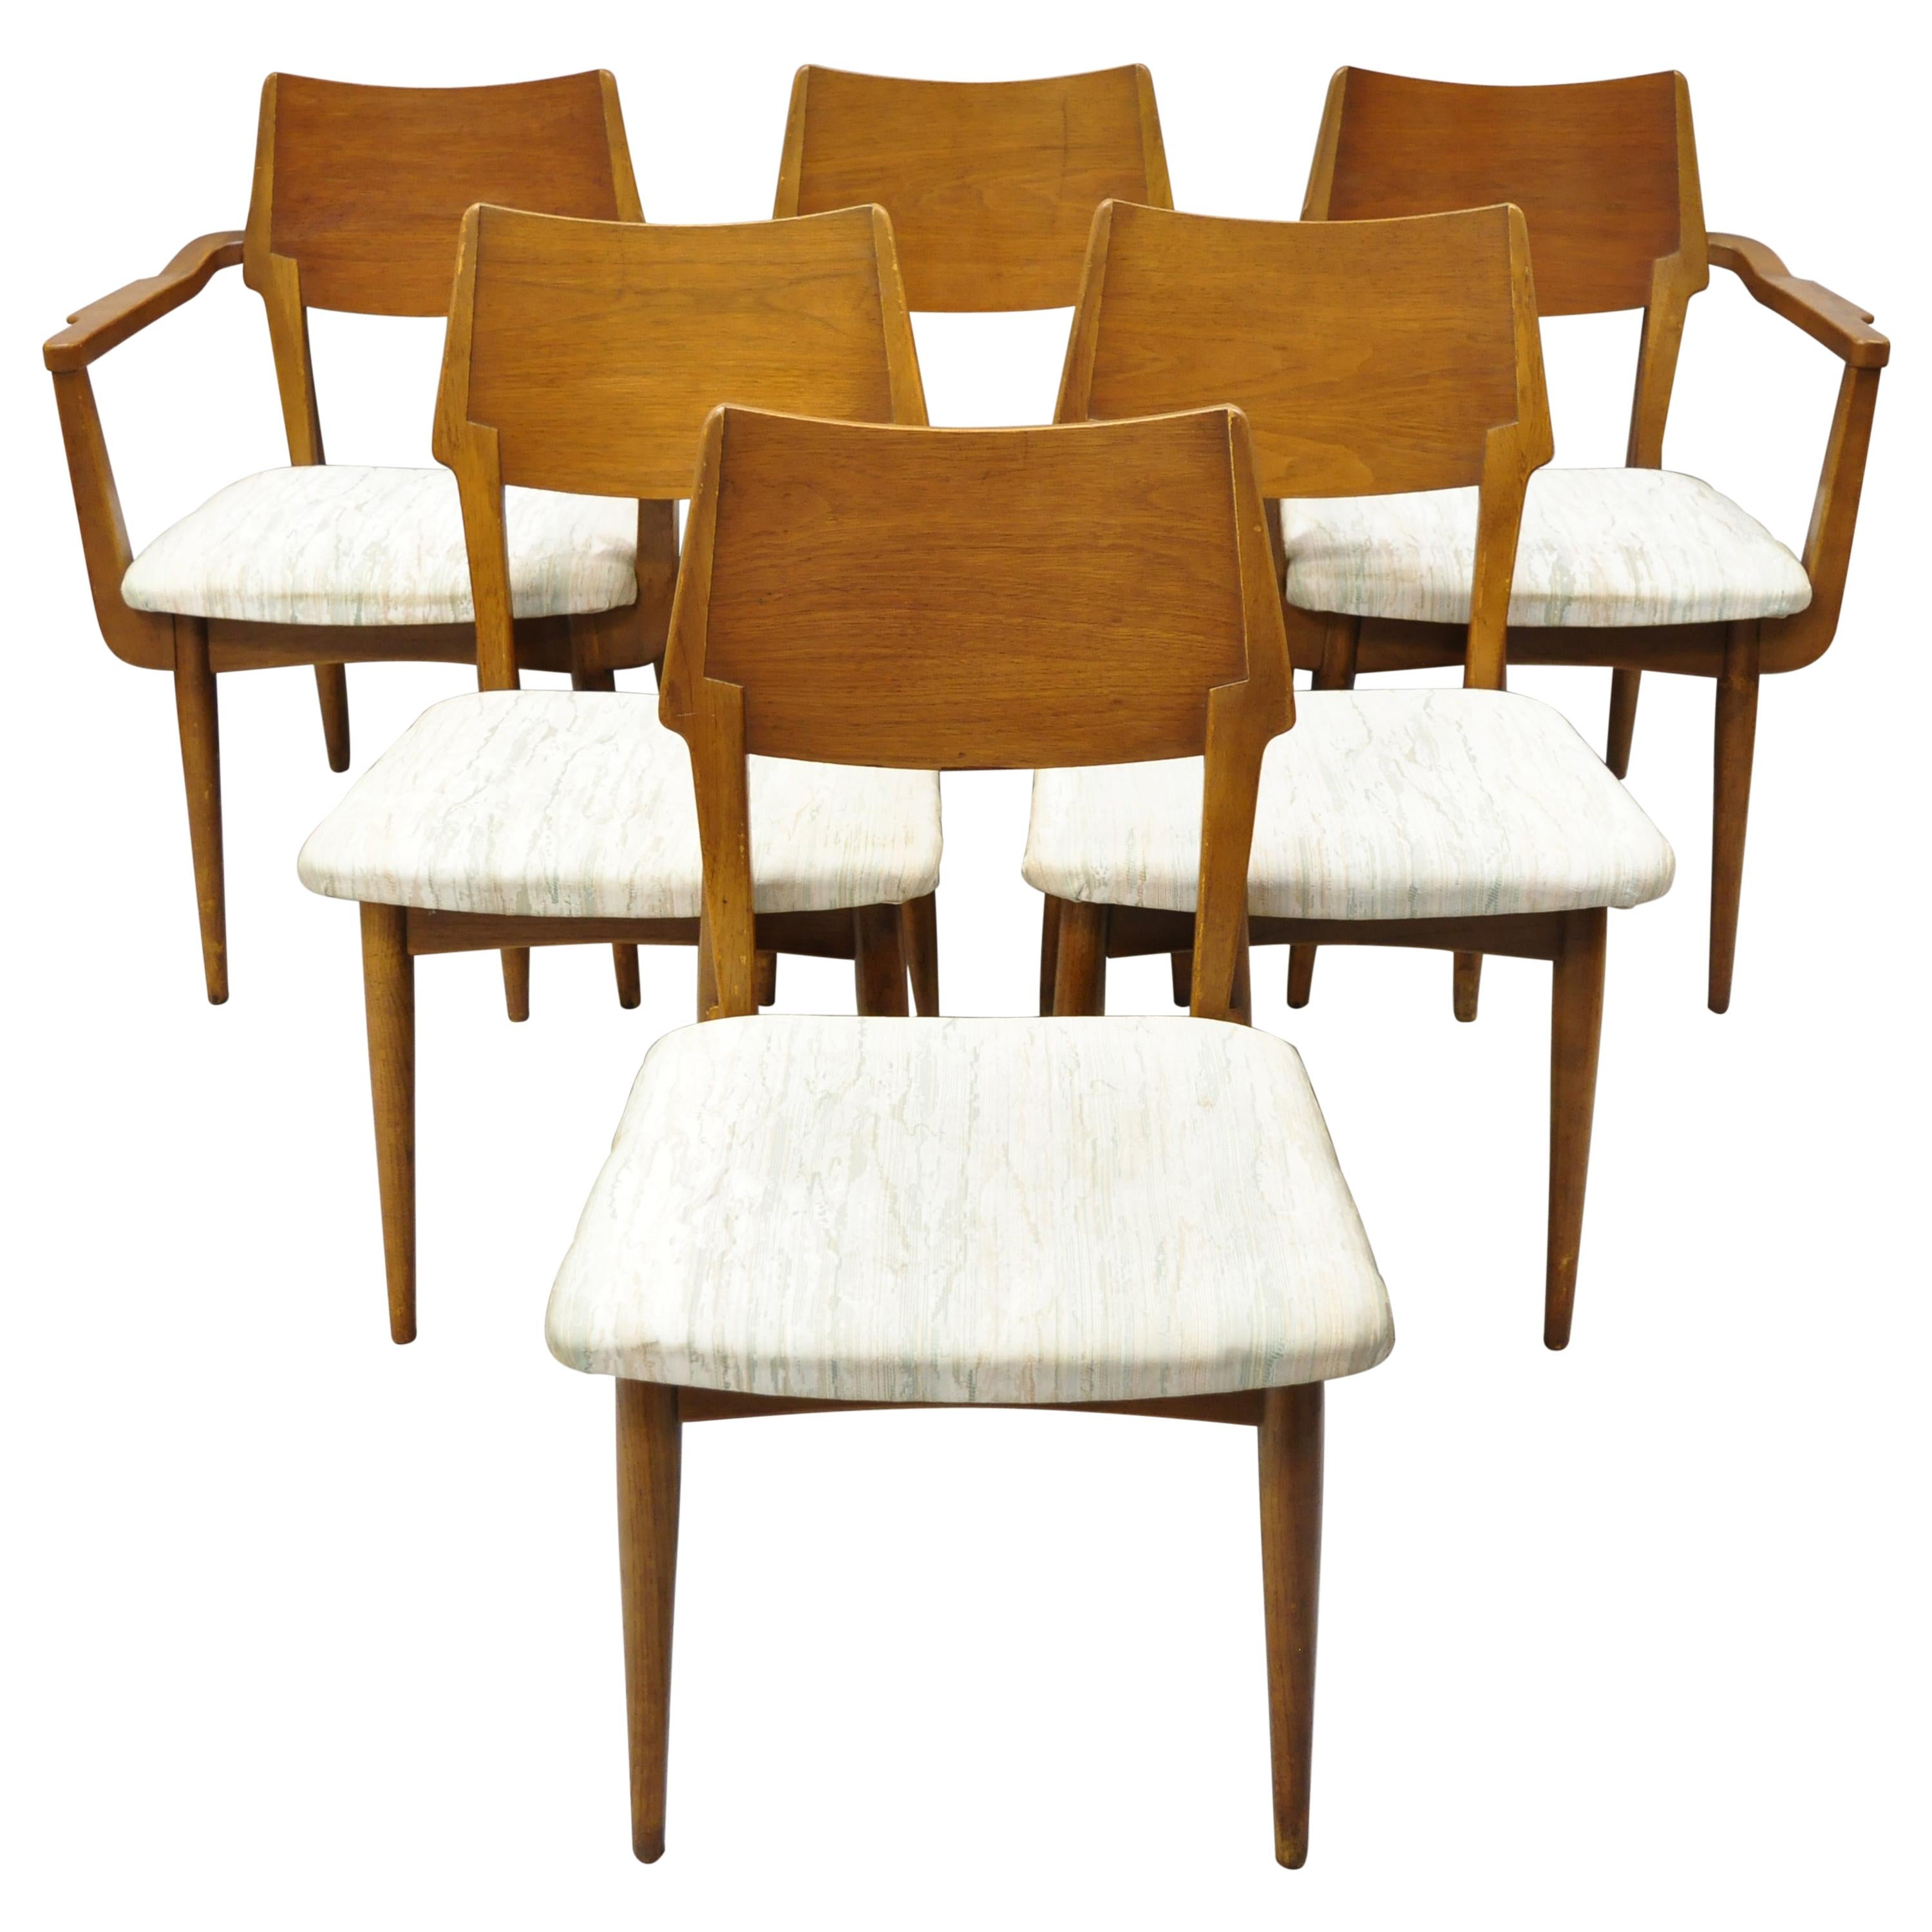 Vintage Mid-20th Century Modern Sculptural Walnut Dining Chairs, Set of 6